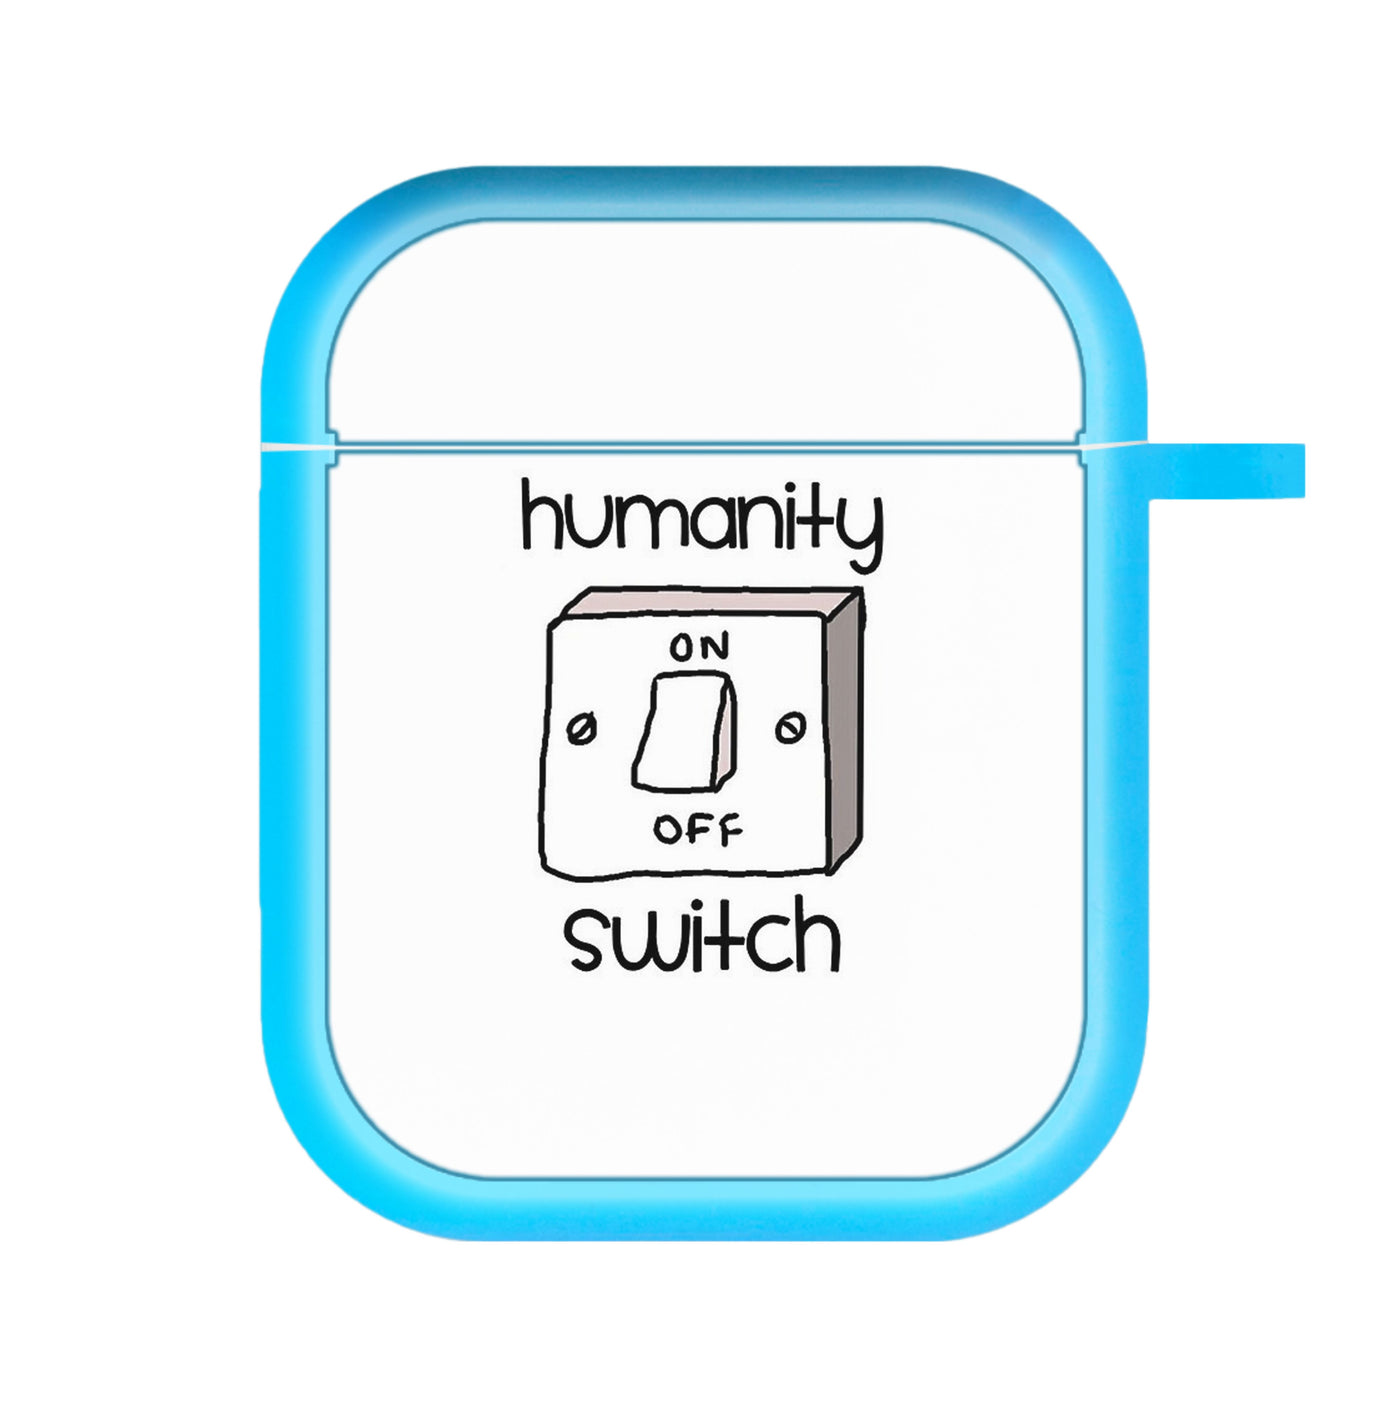 Humanity Switch - Vampire Diaries AirPods Case